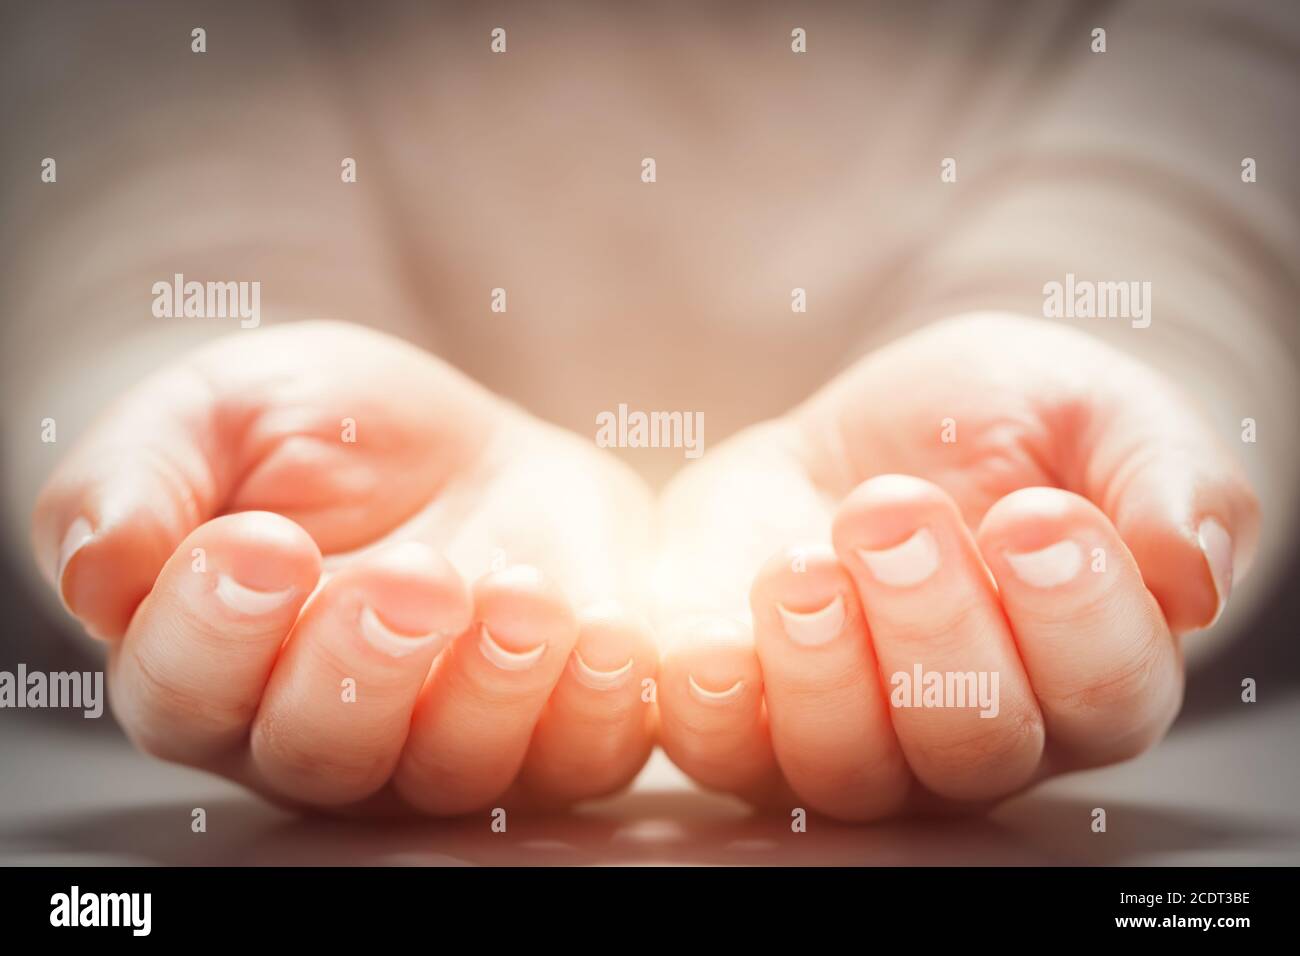 Light in woman#39;s hands. Concepts of sharing, giving, new life Stock Photo